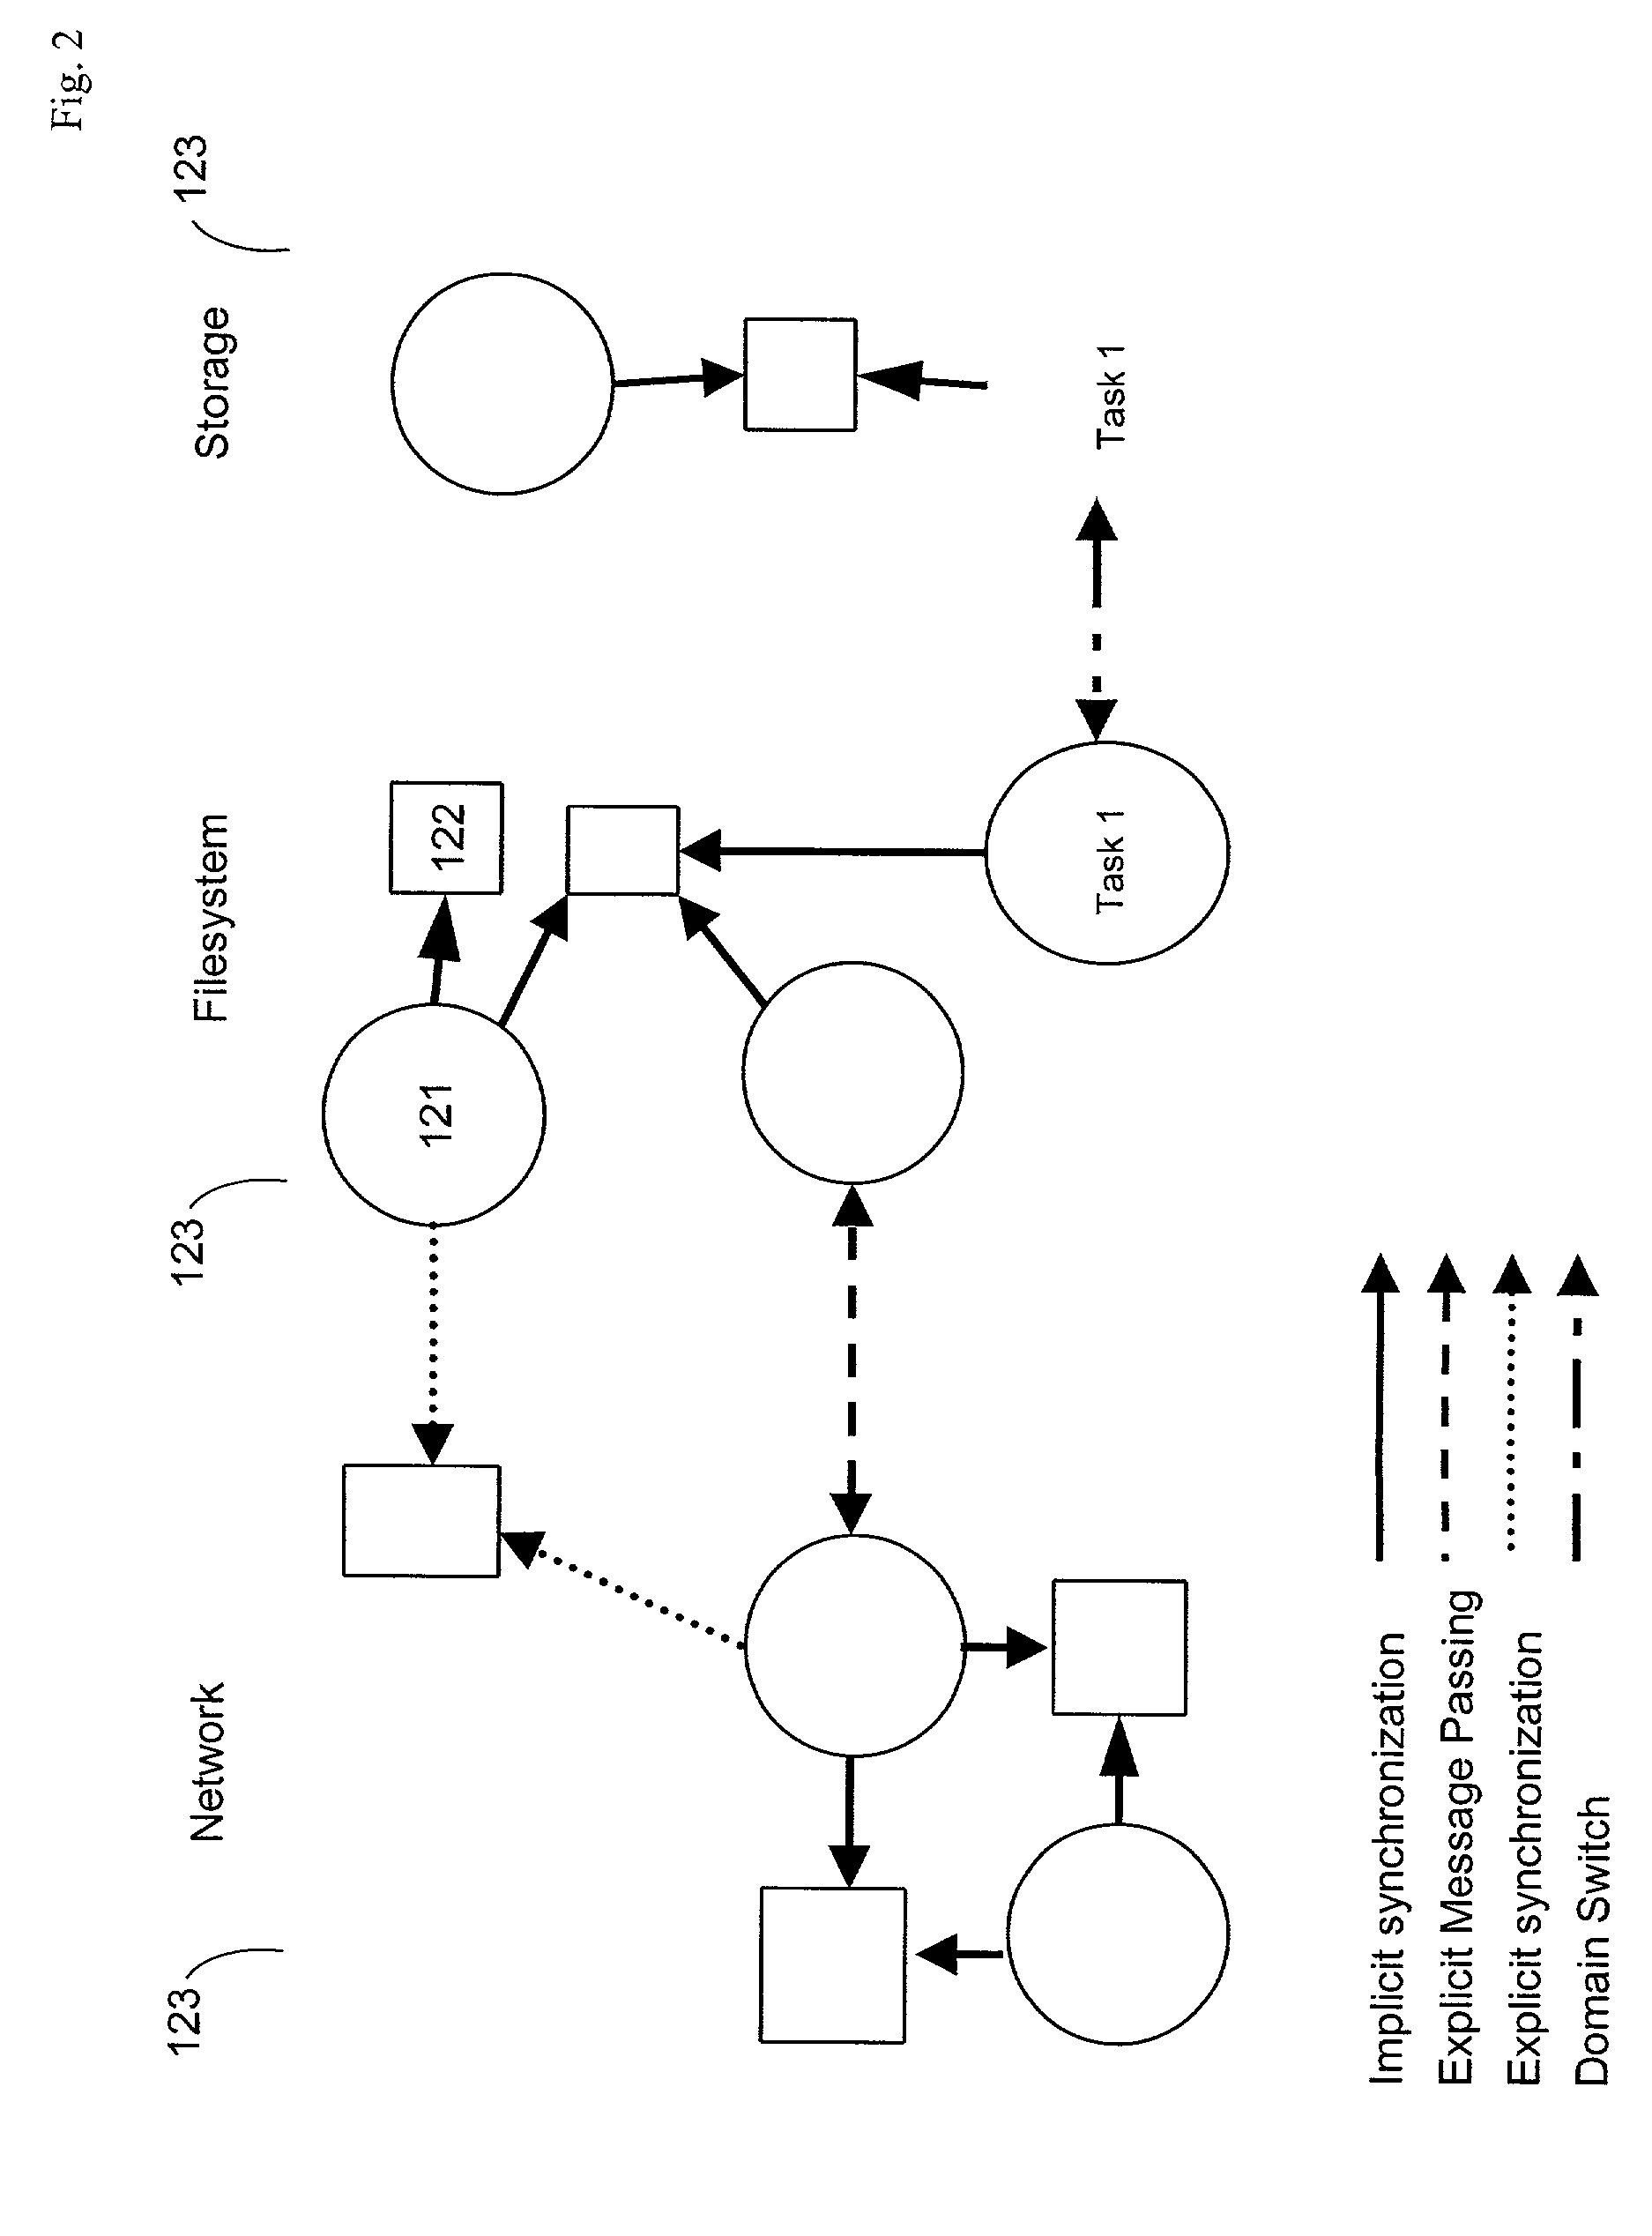 Symmetric multiprocessor synchronization using migrating scheduling domains